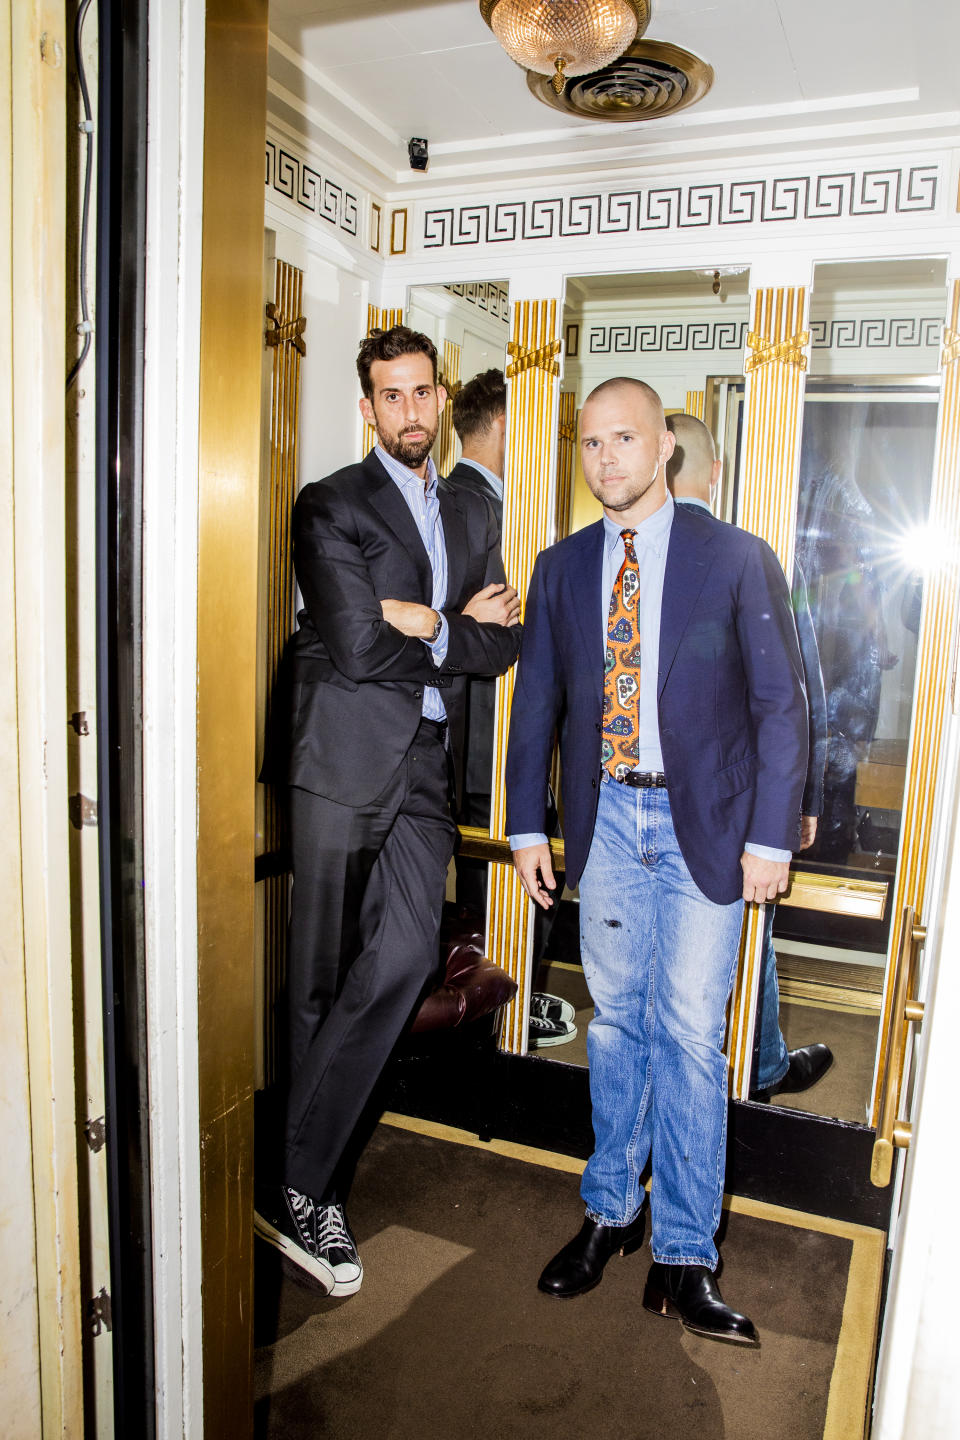 Jason Stewart and Chris Black of podcast 'How Long Gone' at Cafe Carlyle at The Carlyle Hotel in New York City.